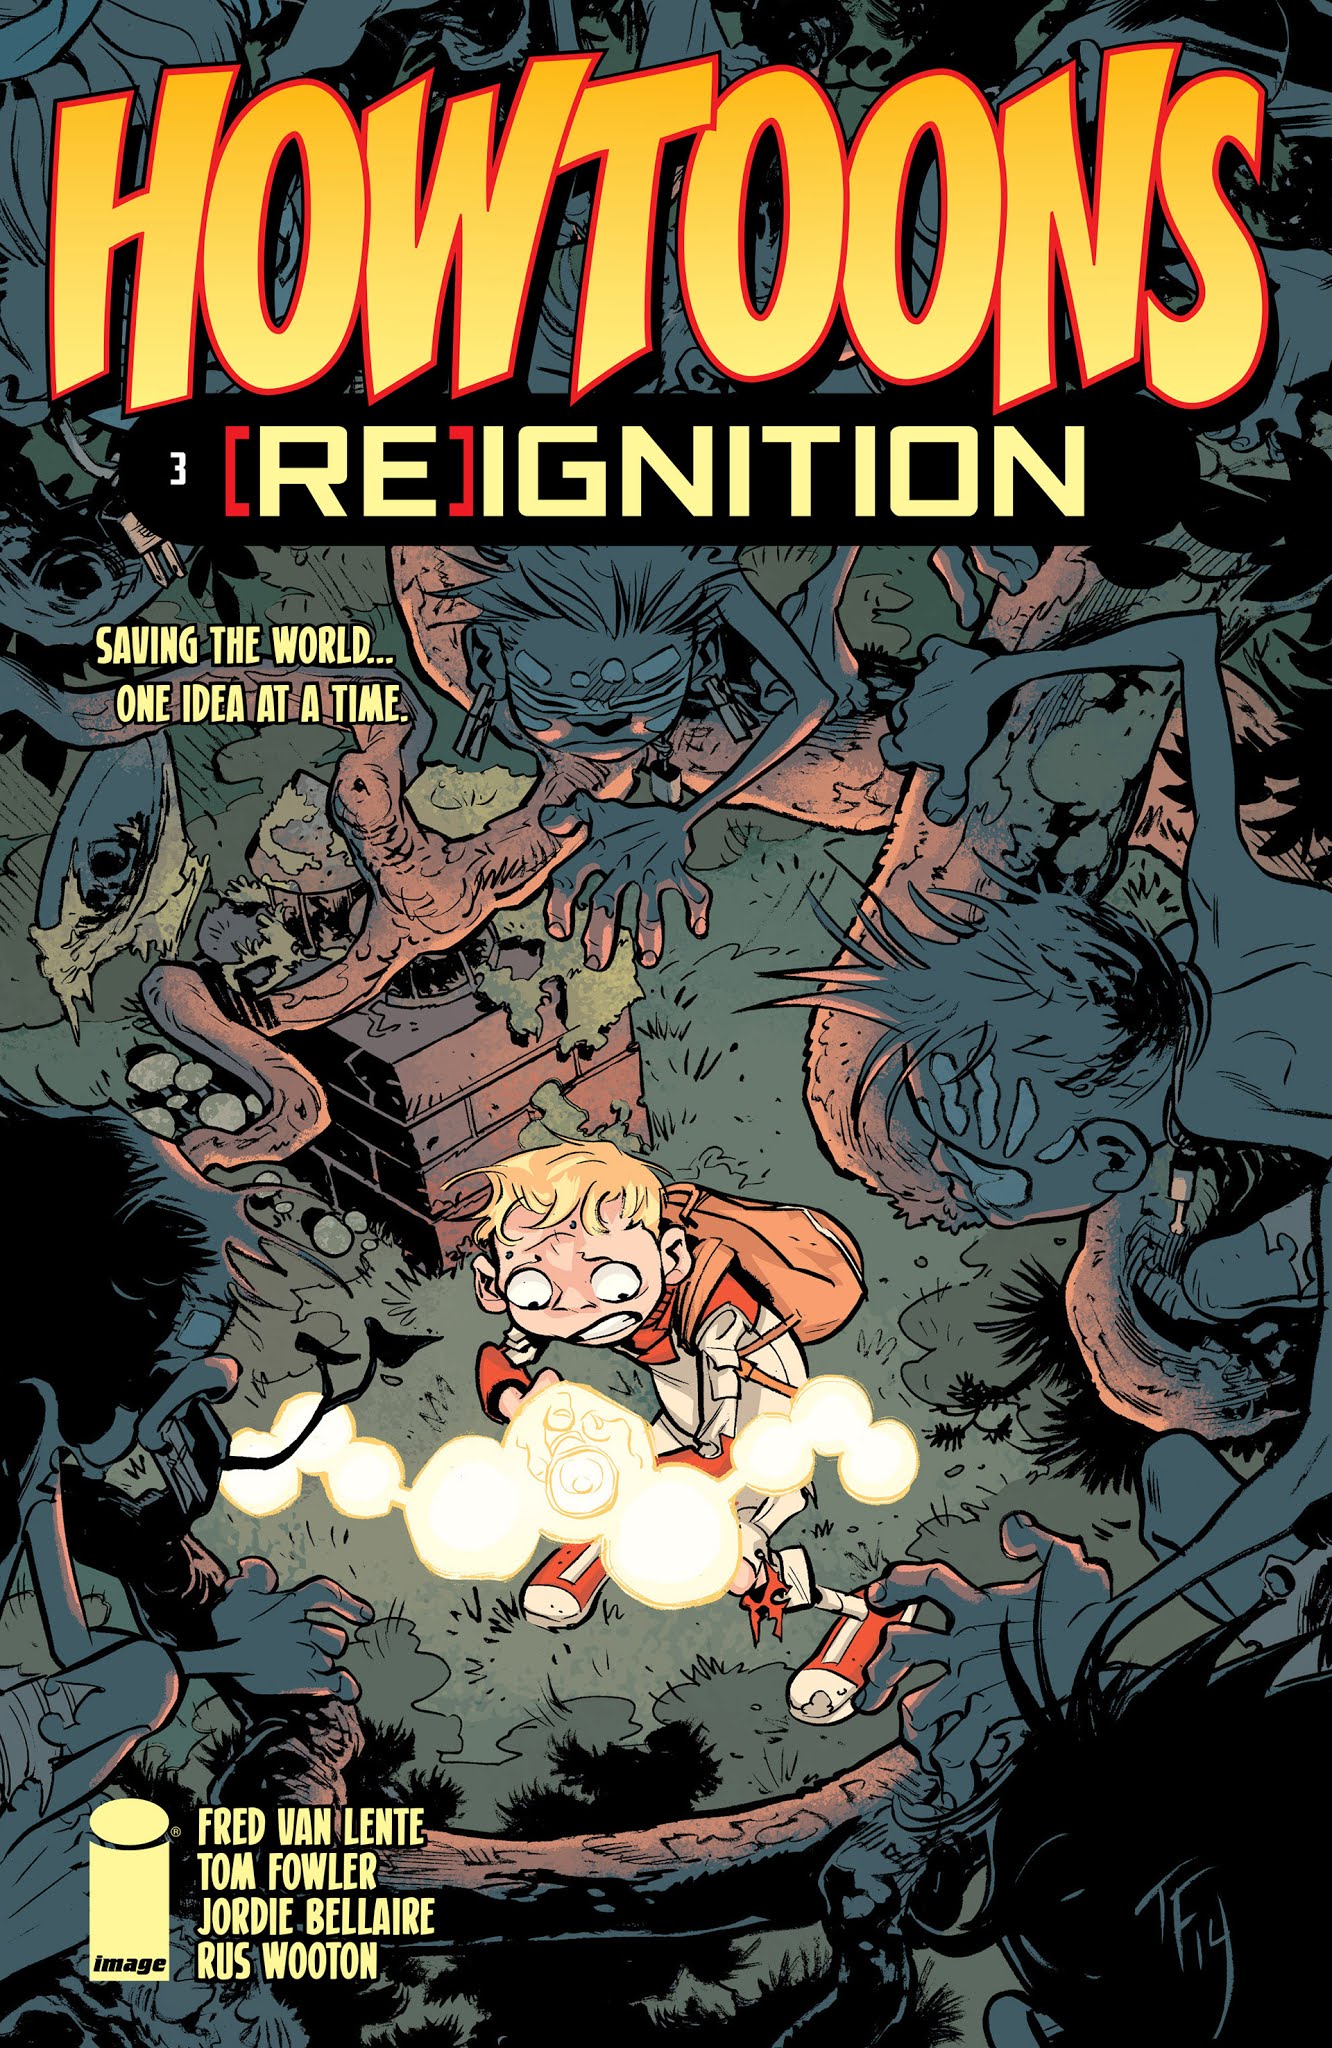 Read online Howtoons [Re]Ignition comic -  Issue #3 - 1